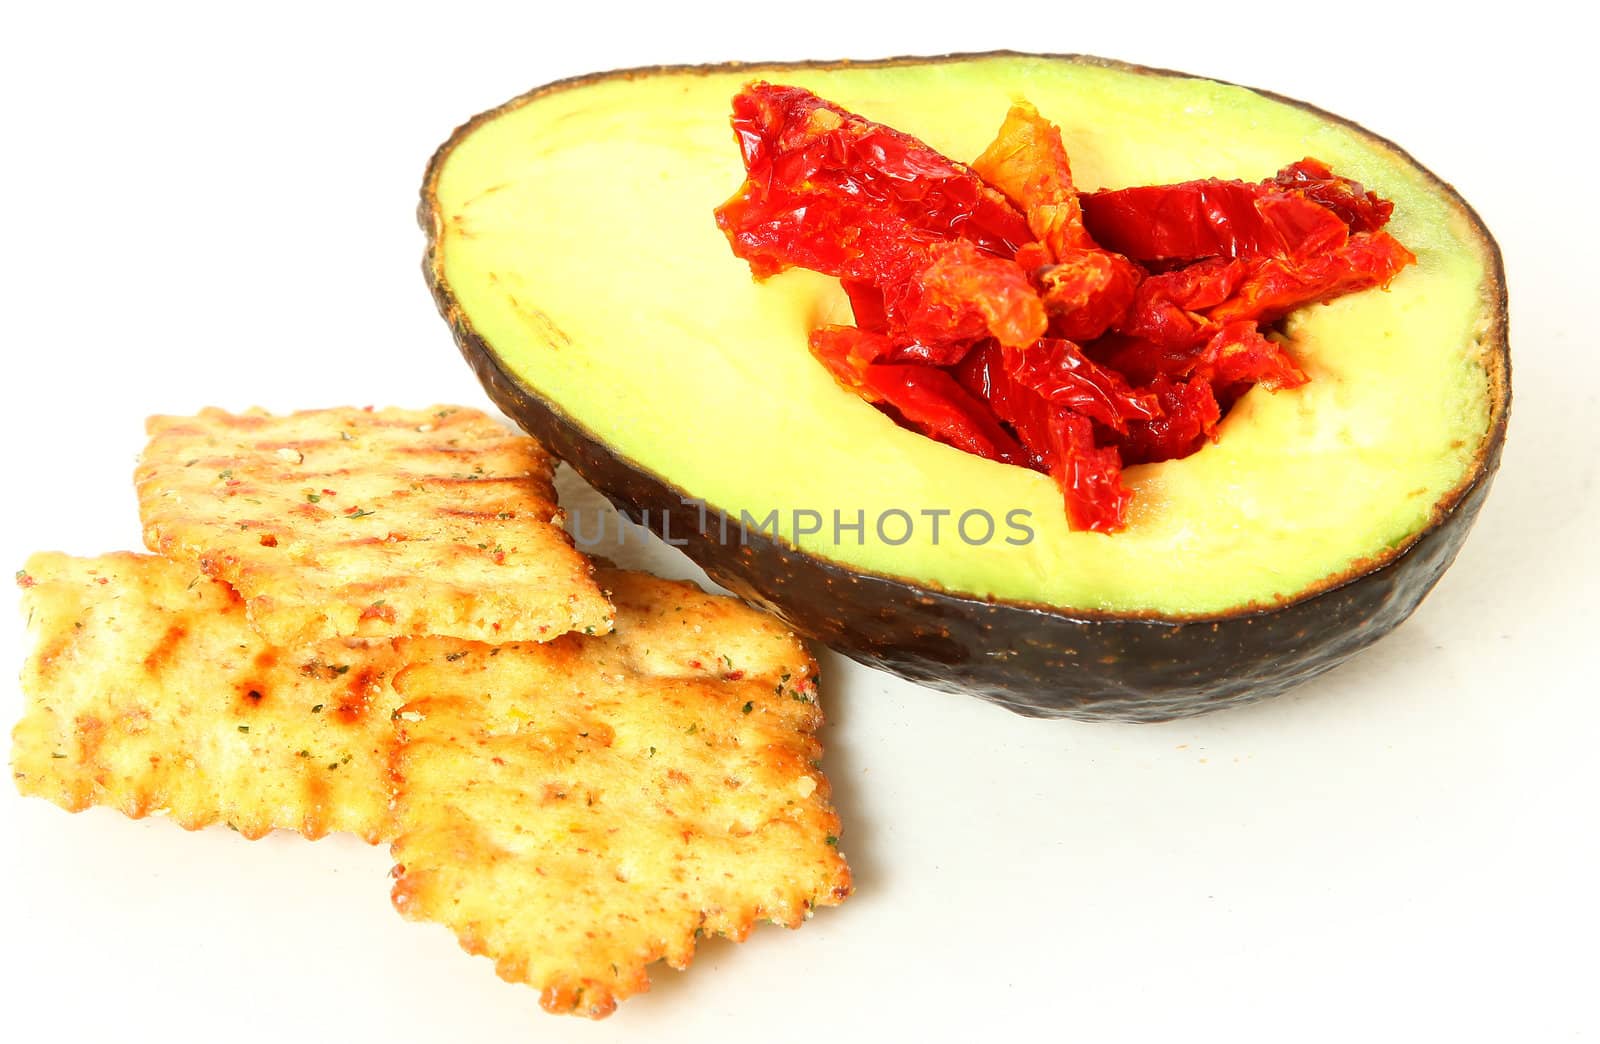 Avocado and tomato snack with crackers.